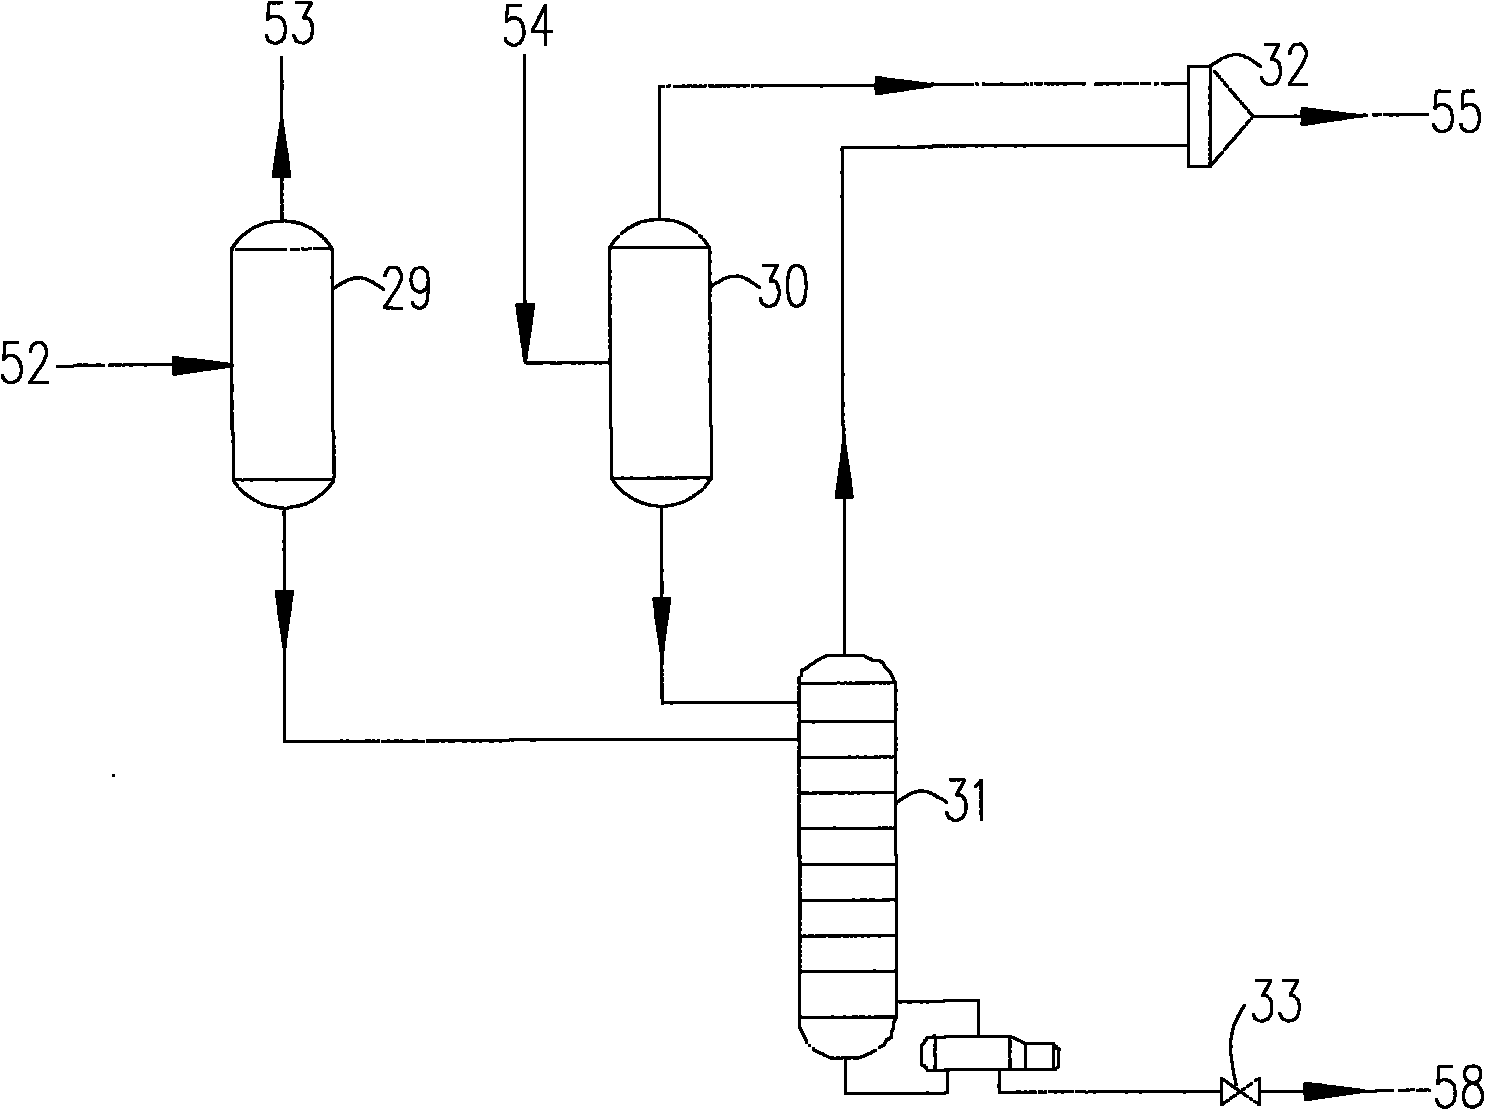 Process for compact natural gas liquefying and floating production